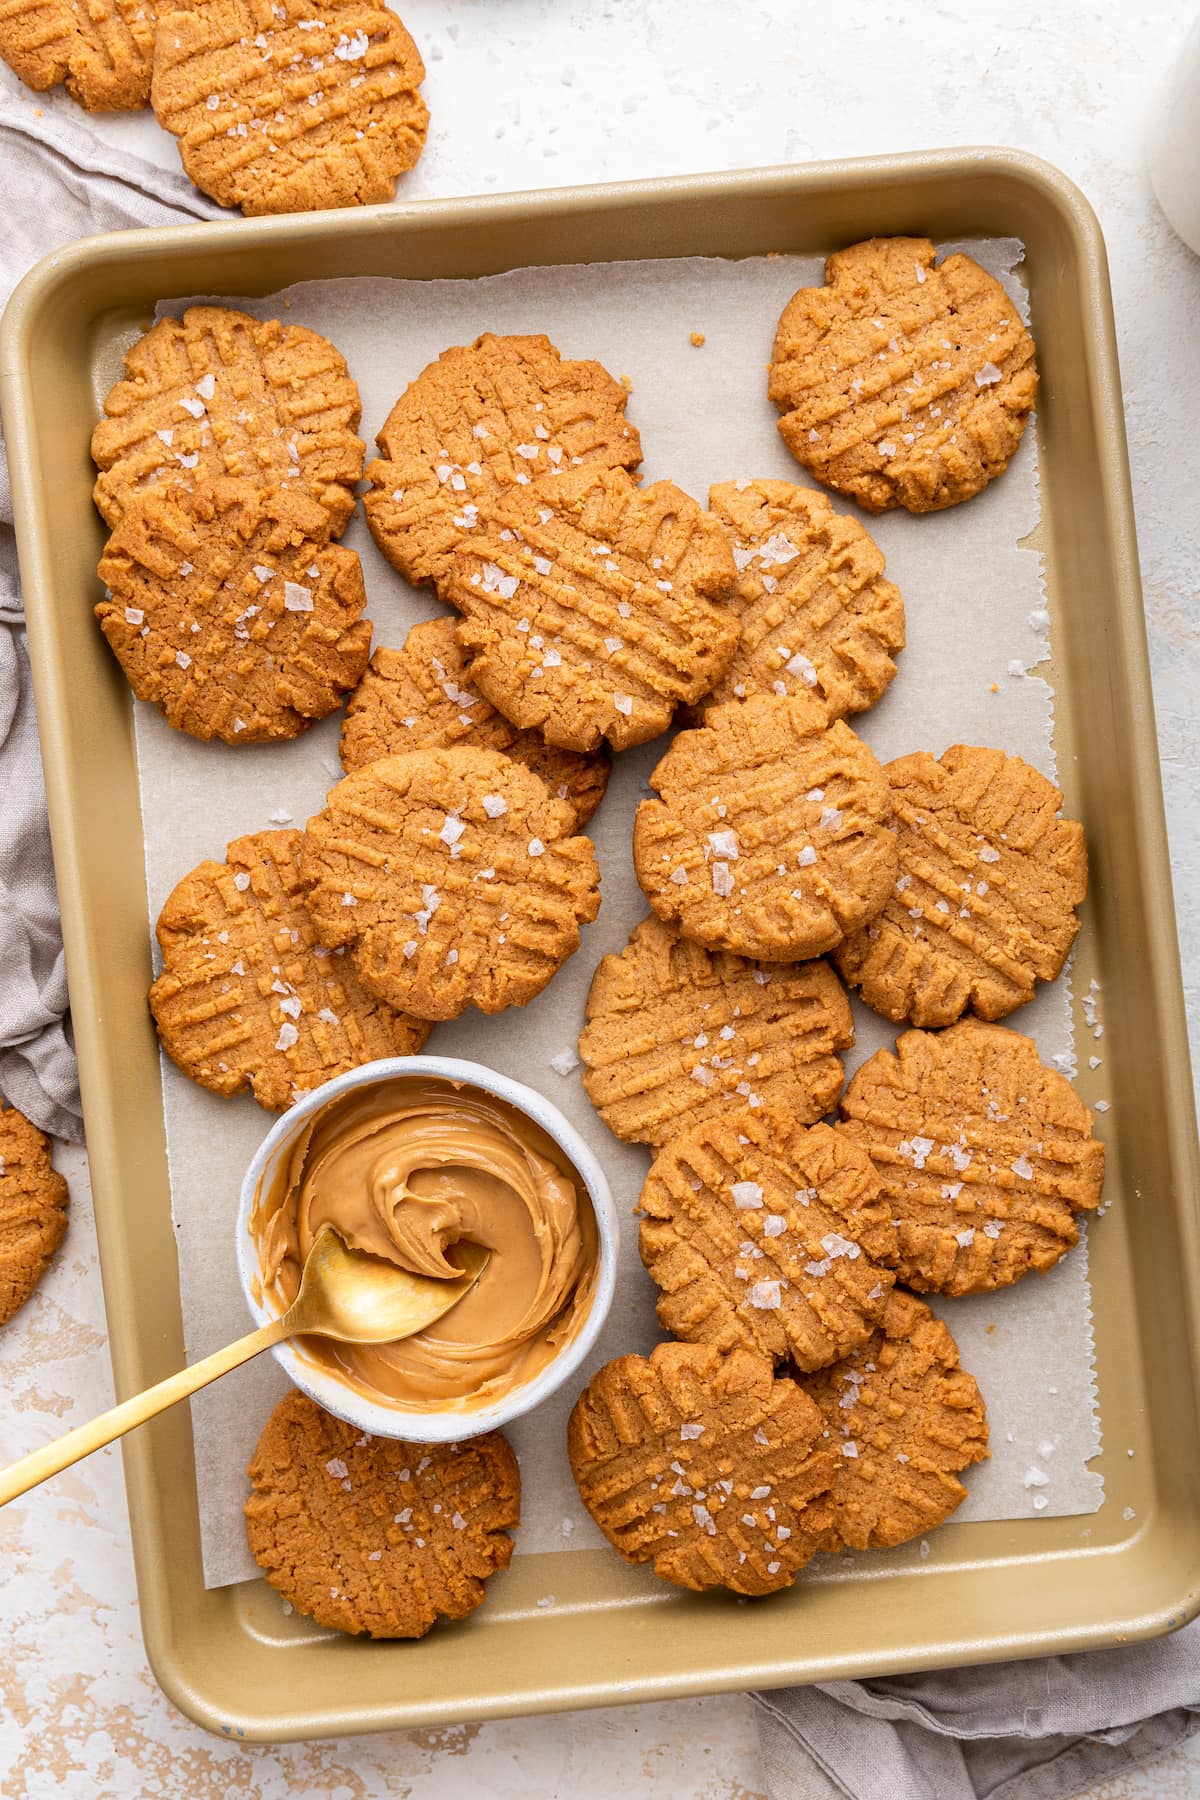 Peanut butter cookies on a baking sheet with a bowl of peanut butter.